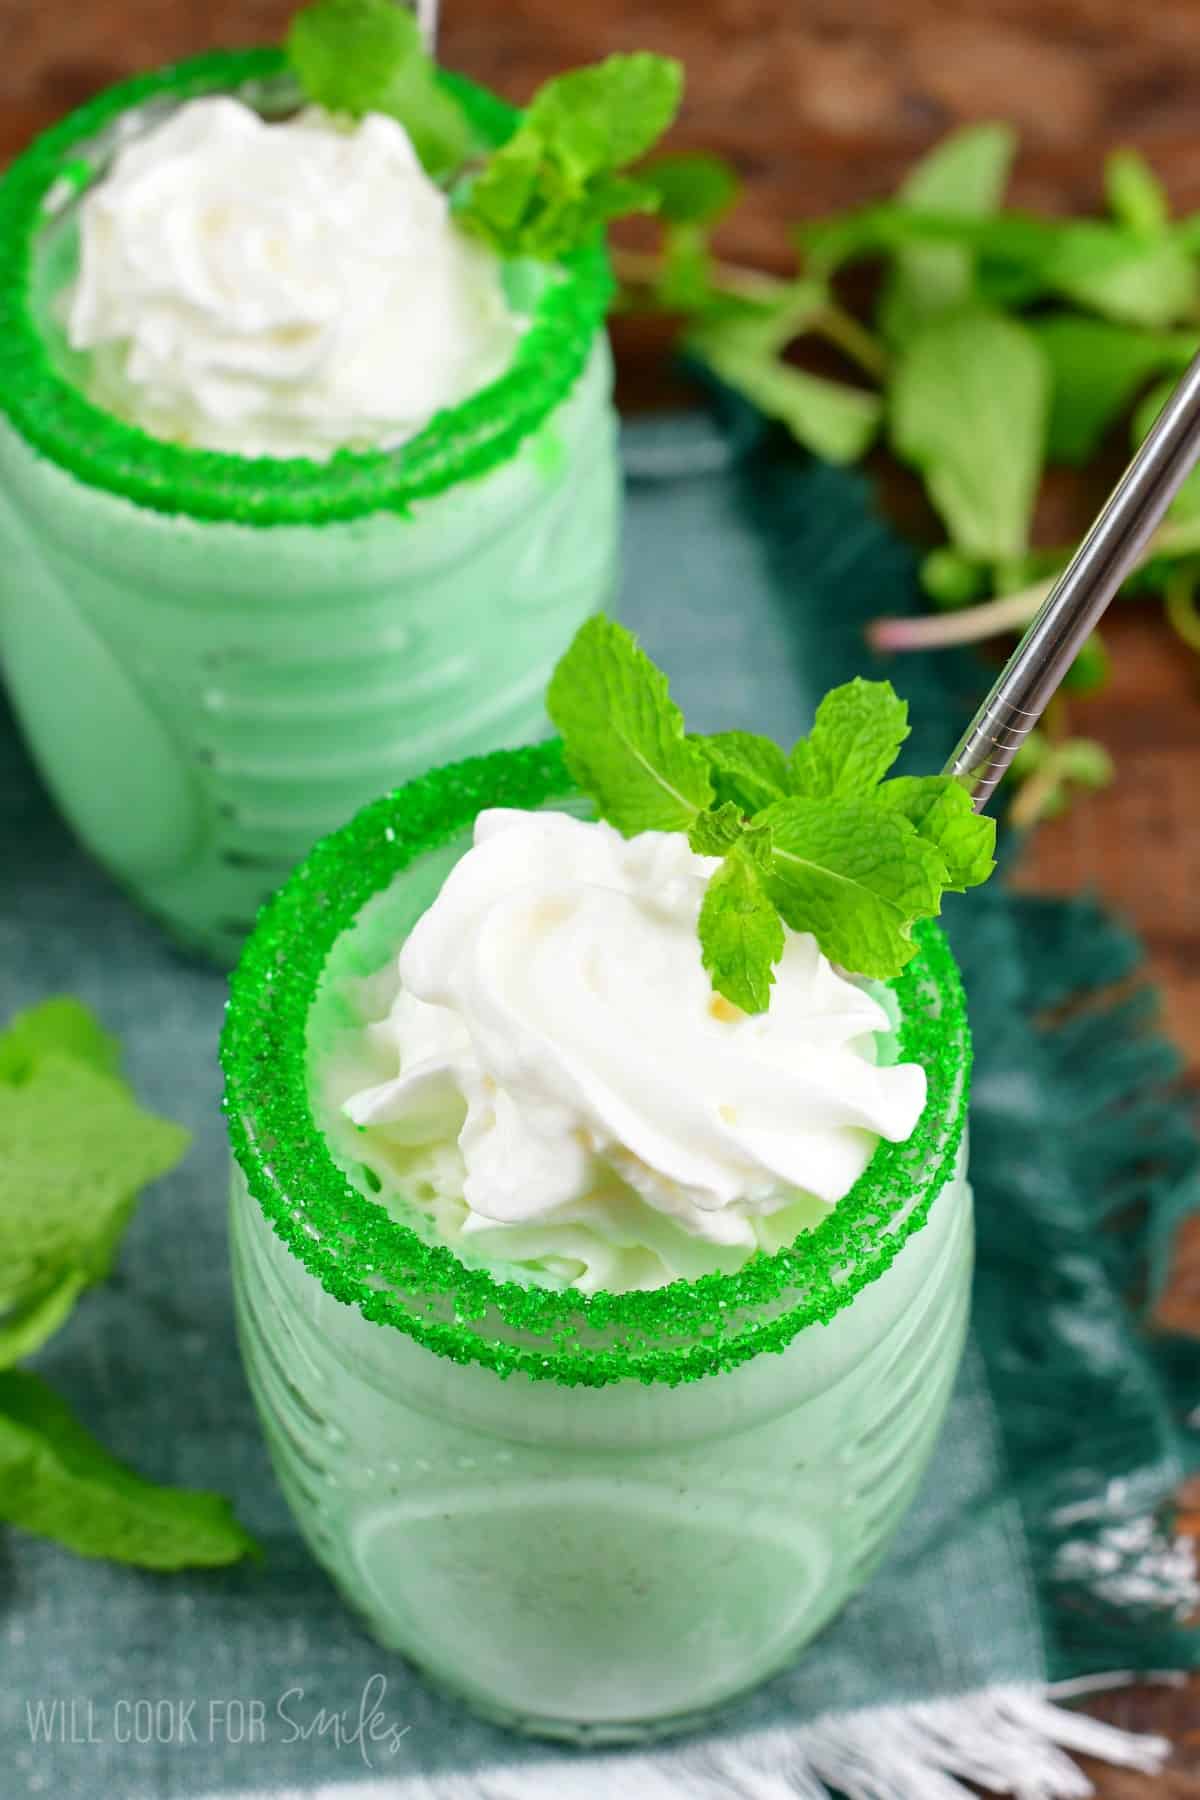 two shamrock shakes in a glass with green sprinkles on the rim, whipped cream and a piece of mint as garnish.